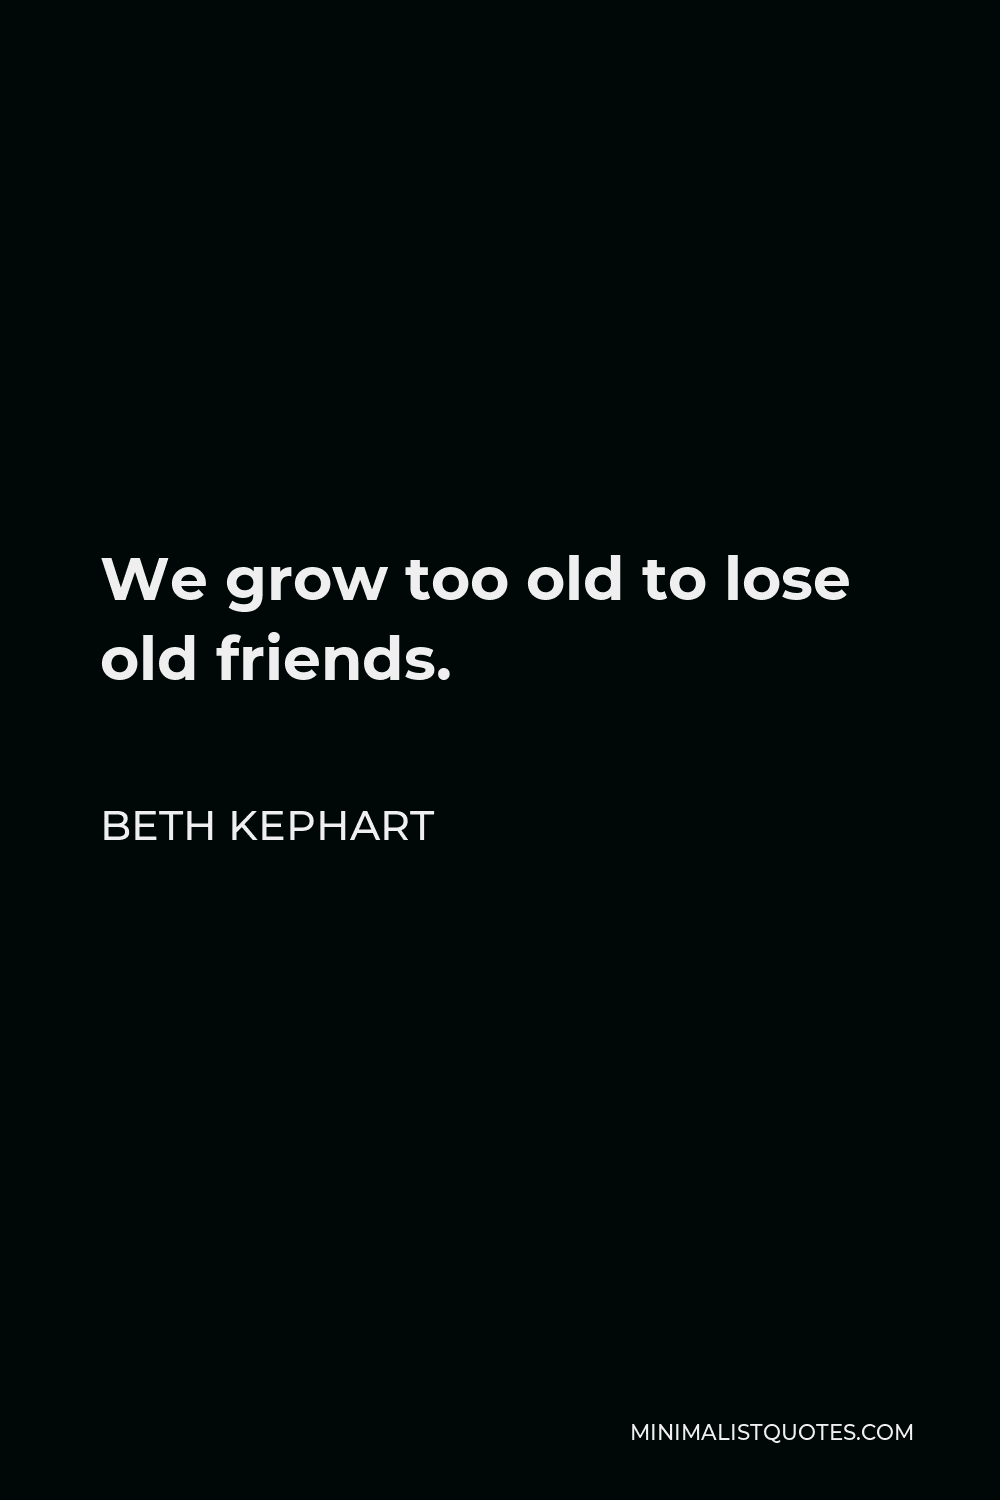 Beth Kephart Quote - We grow too old to lose old friends.